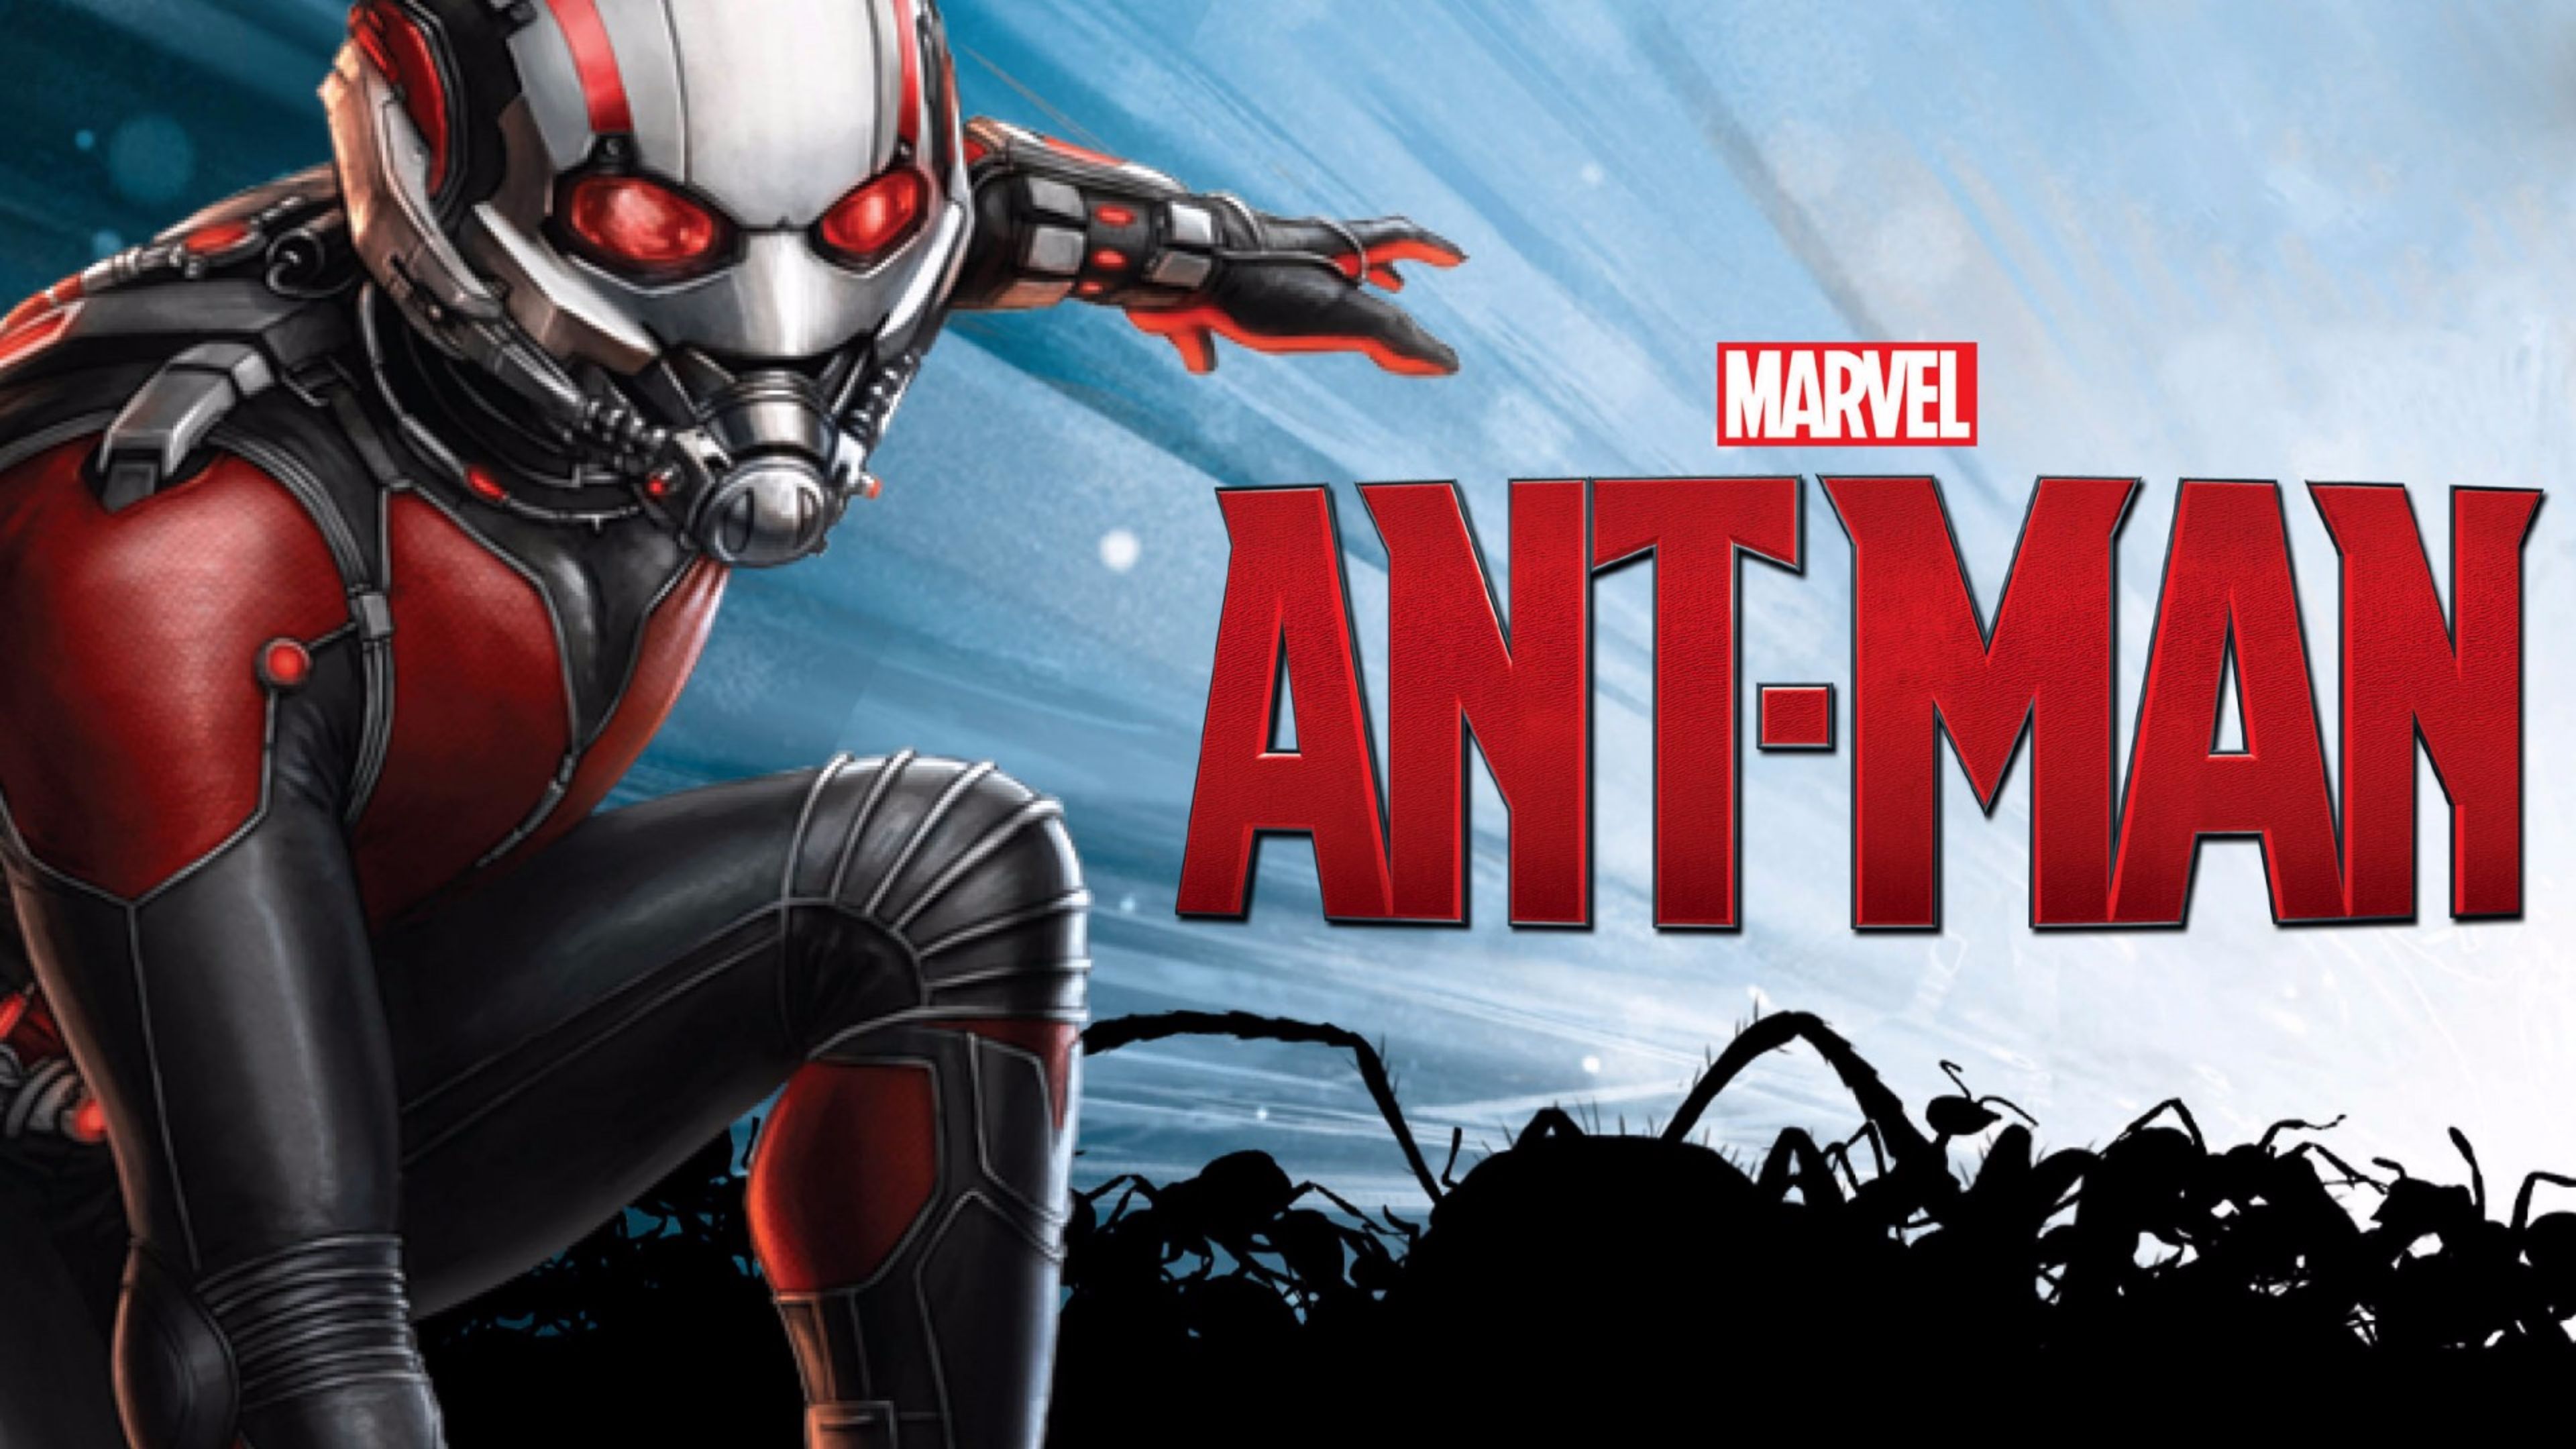 Antman 4K wallpaper for your desktop or mobile screen free and easy to download